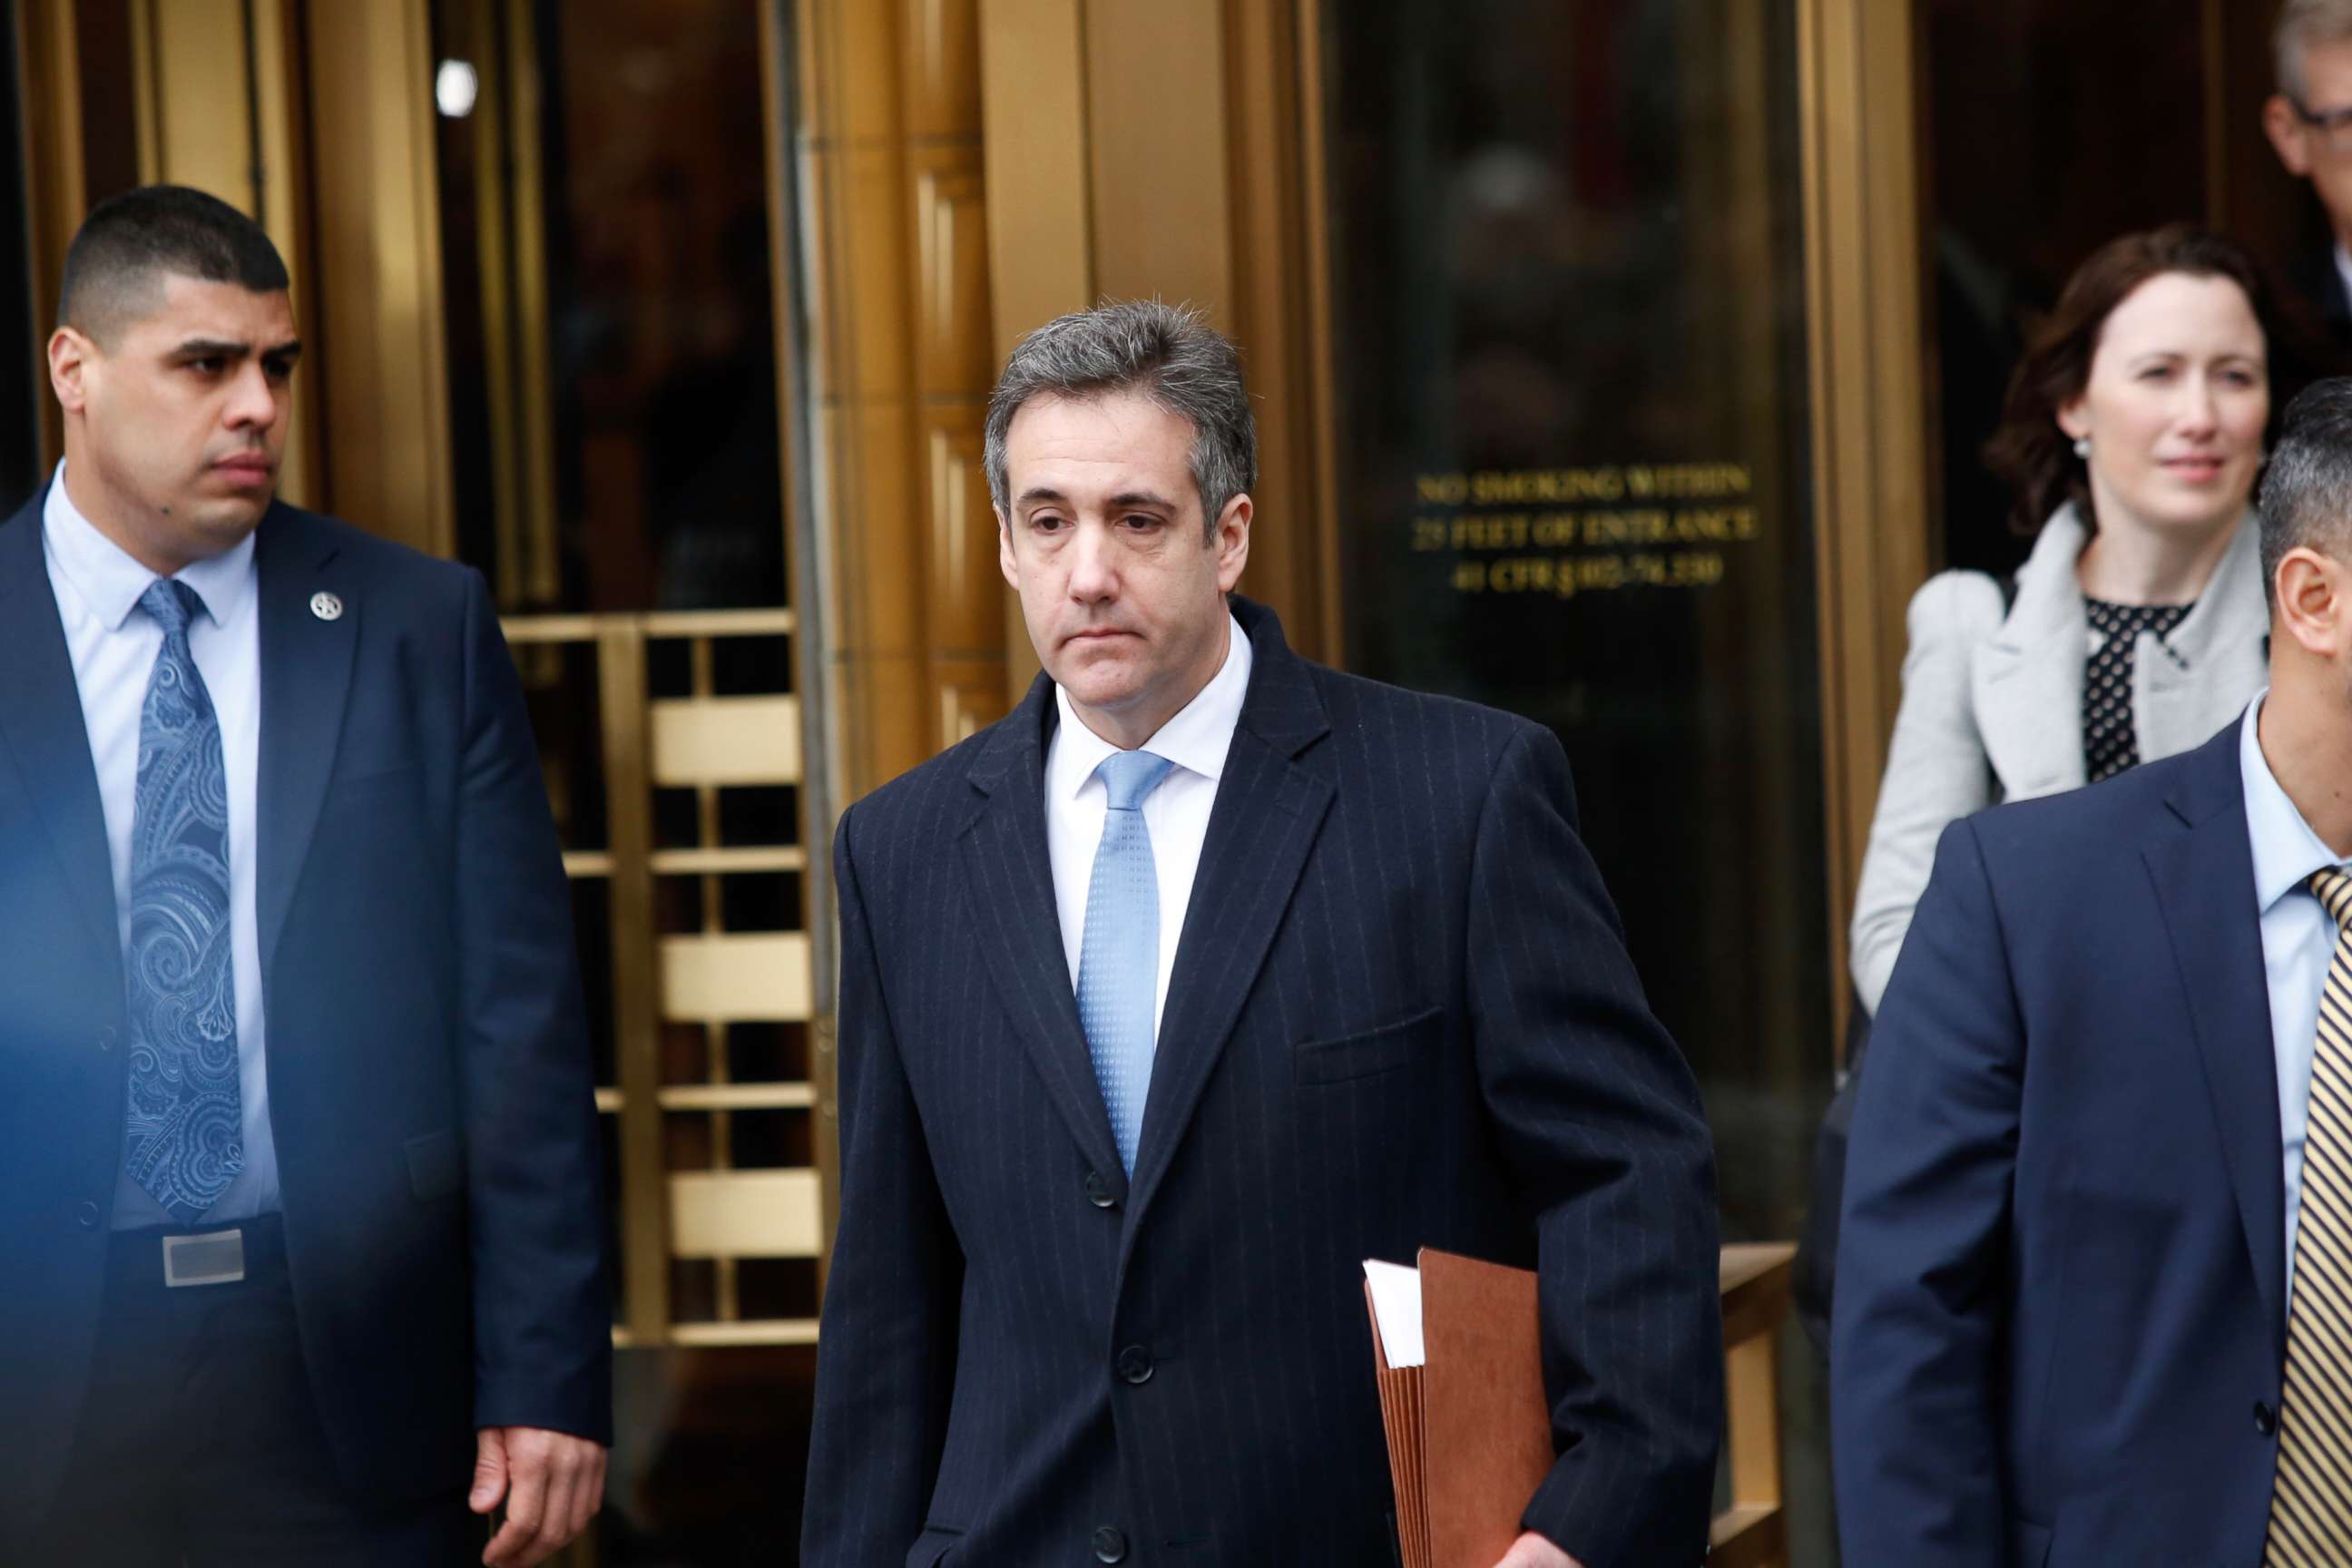 PHOTO: Michael Cohen, President Donald Trump's former personal attorney exits federal court after his sentencing hearing, Dec. 12, 2018, in New York.